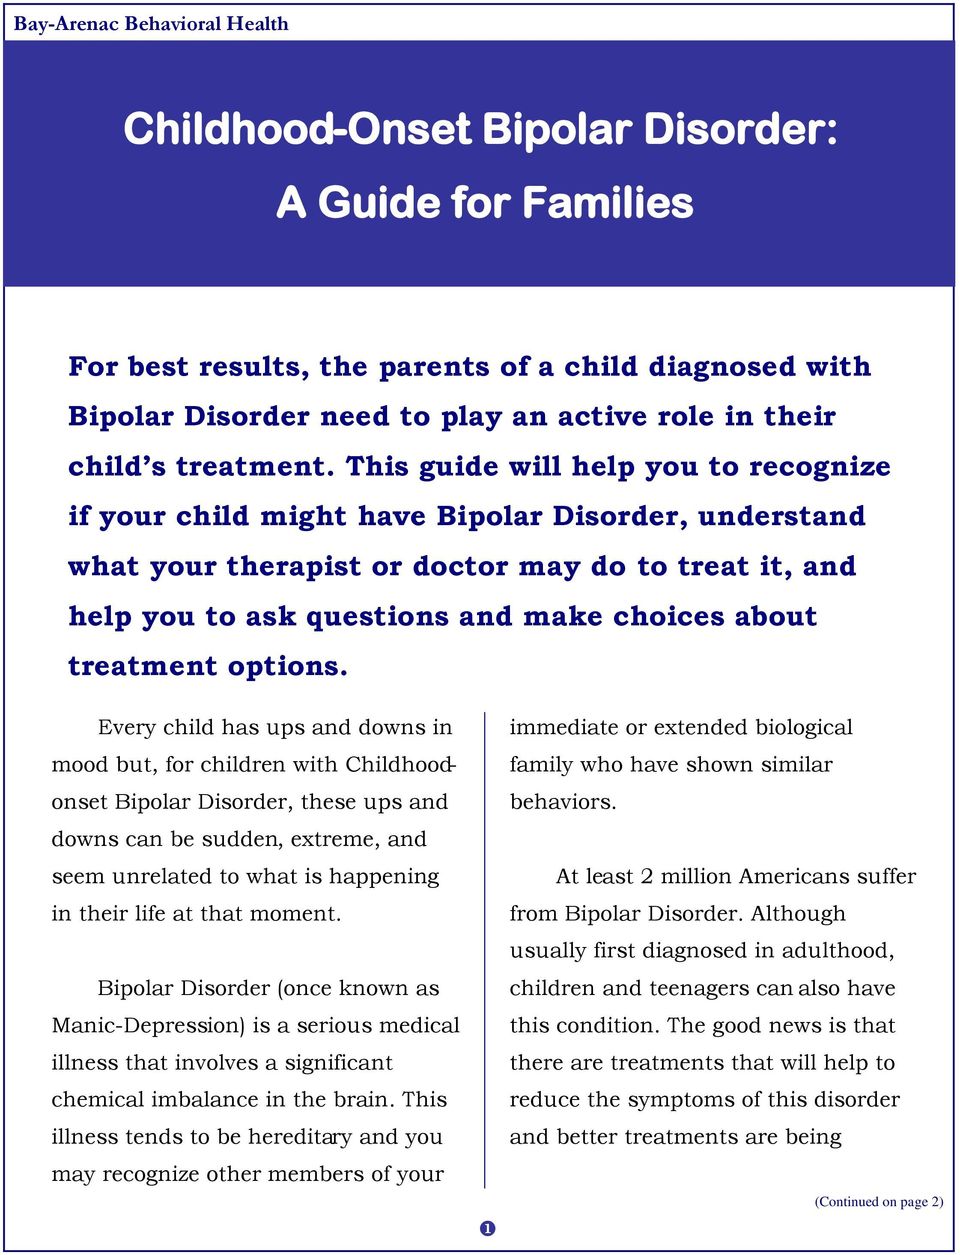 This guide will help you to recognize if your child might have Bipolar Disorder, understand what your therapist or doctor may do to treat it, and help you to ask questions and make choices about